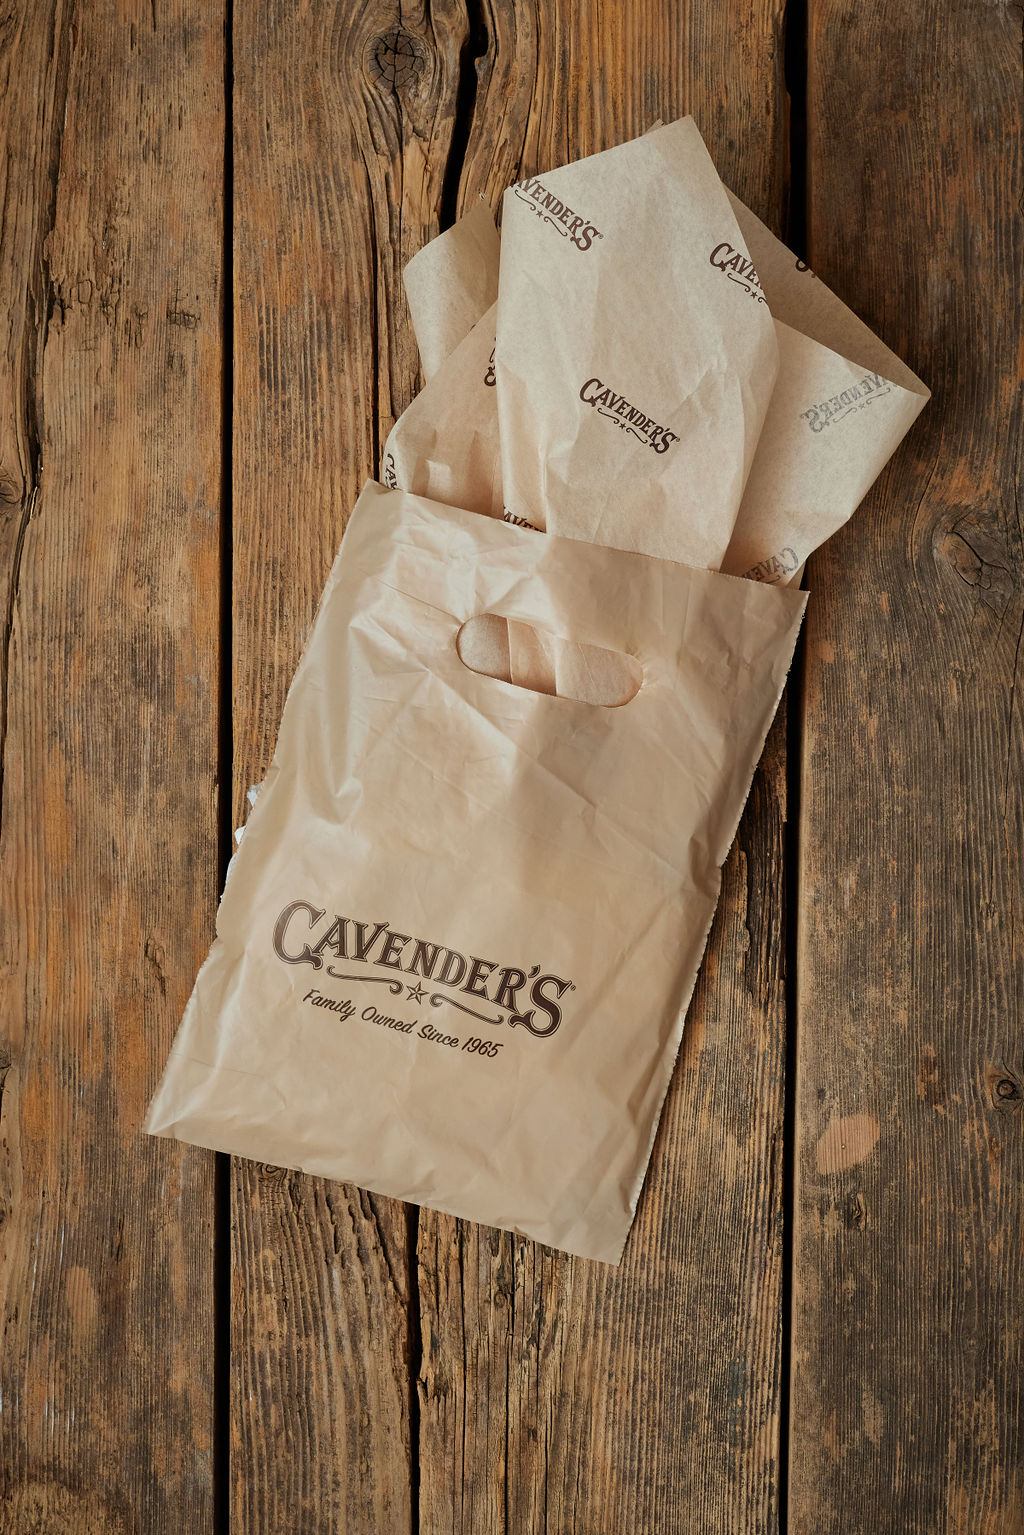 Cavender's plastic bags by Creative Retail Packaging